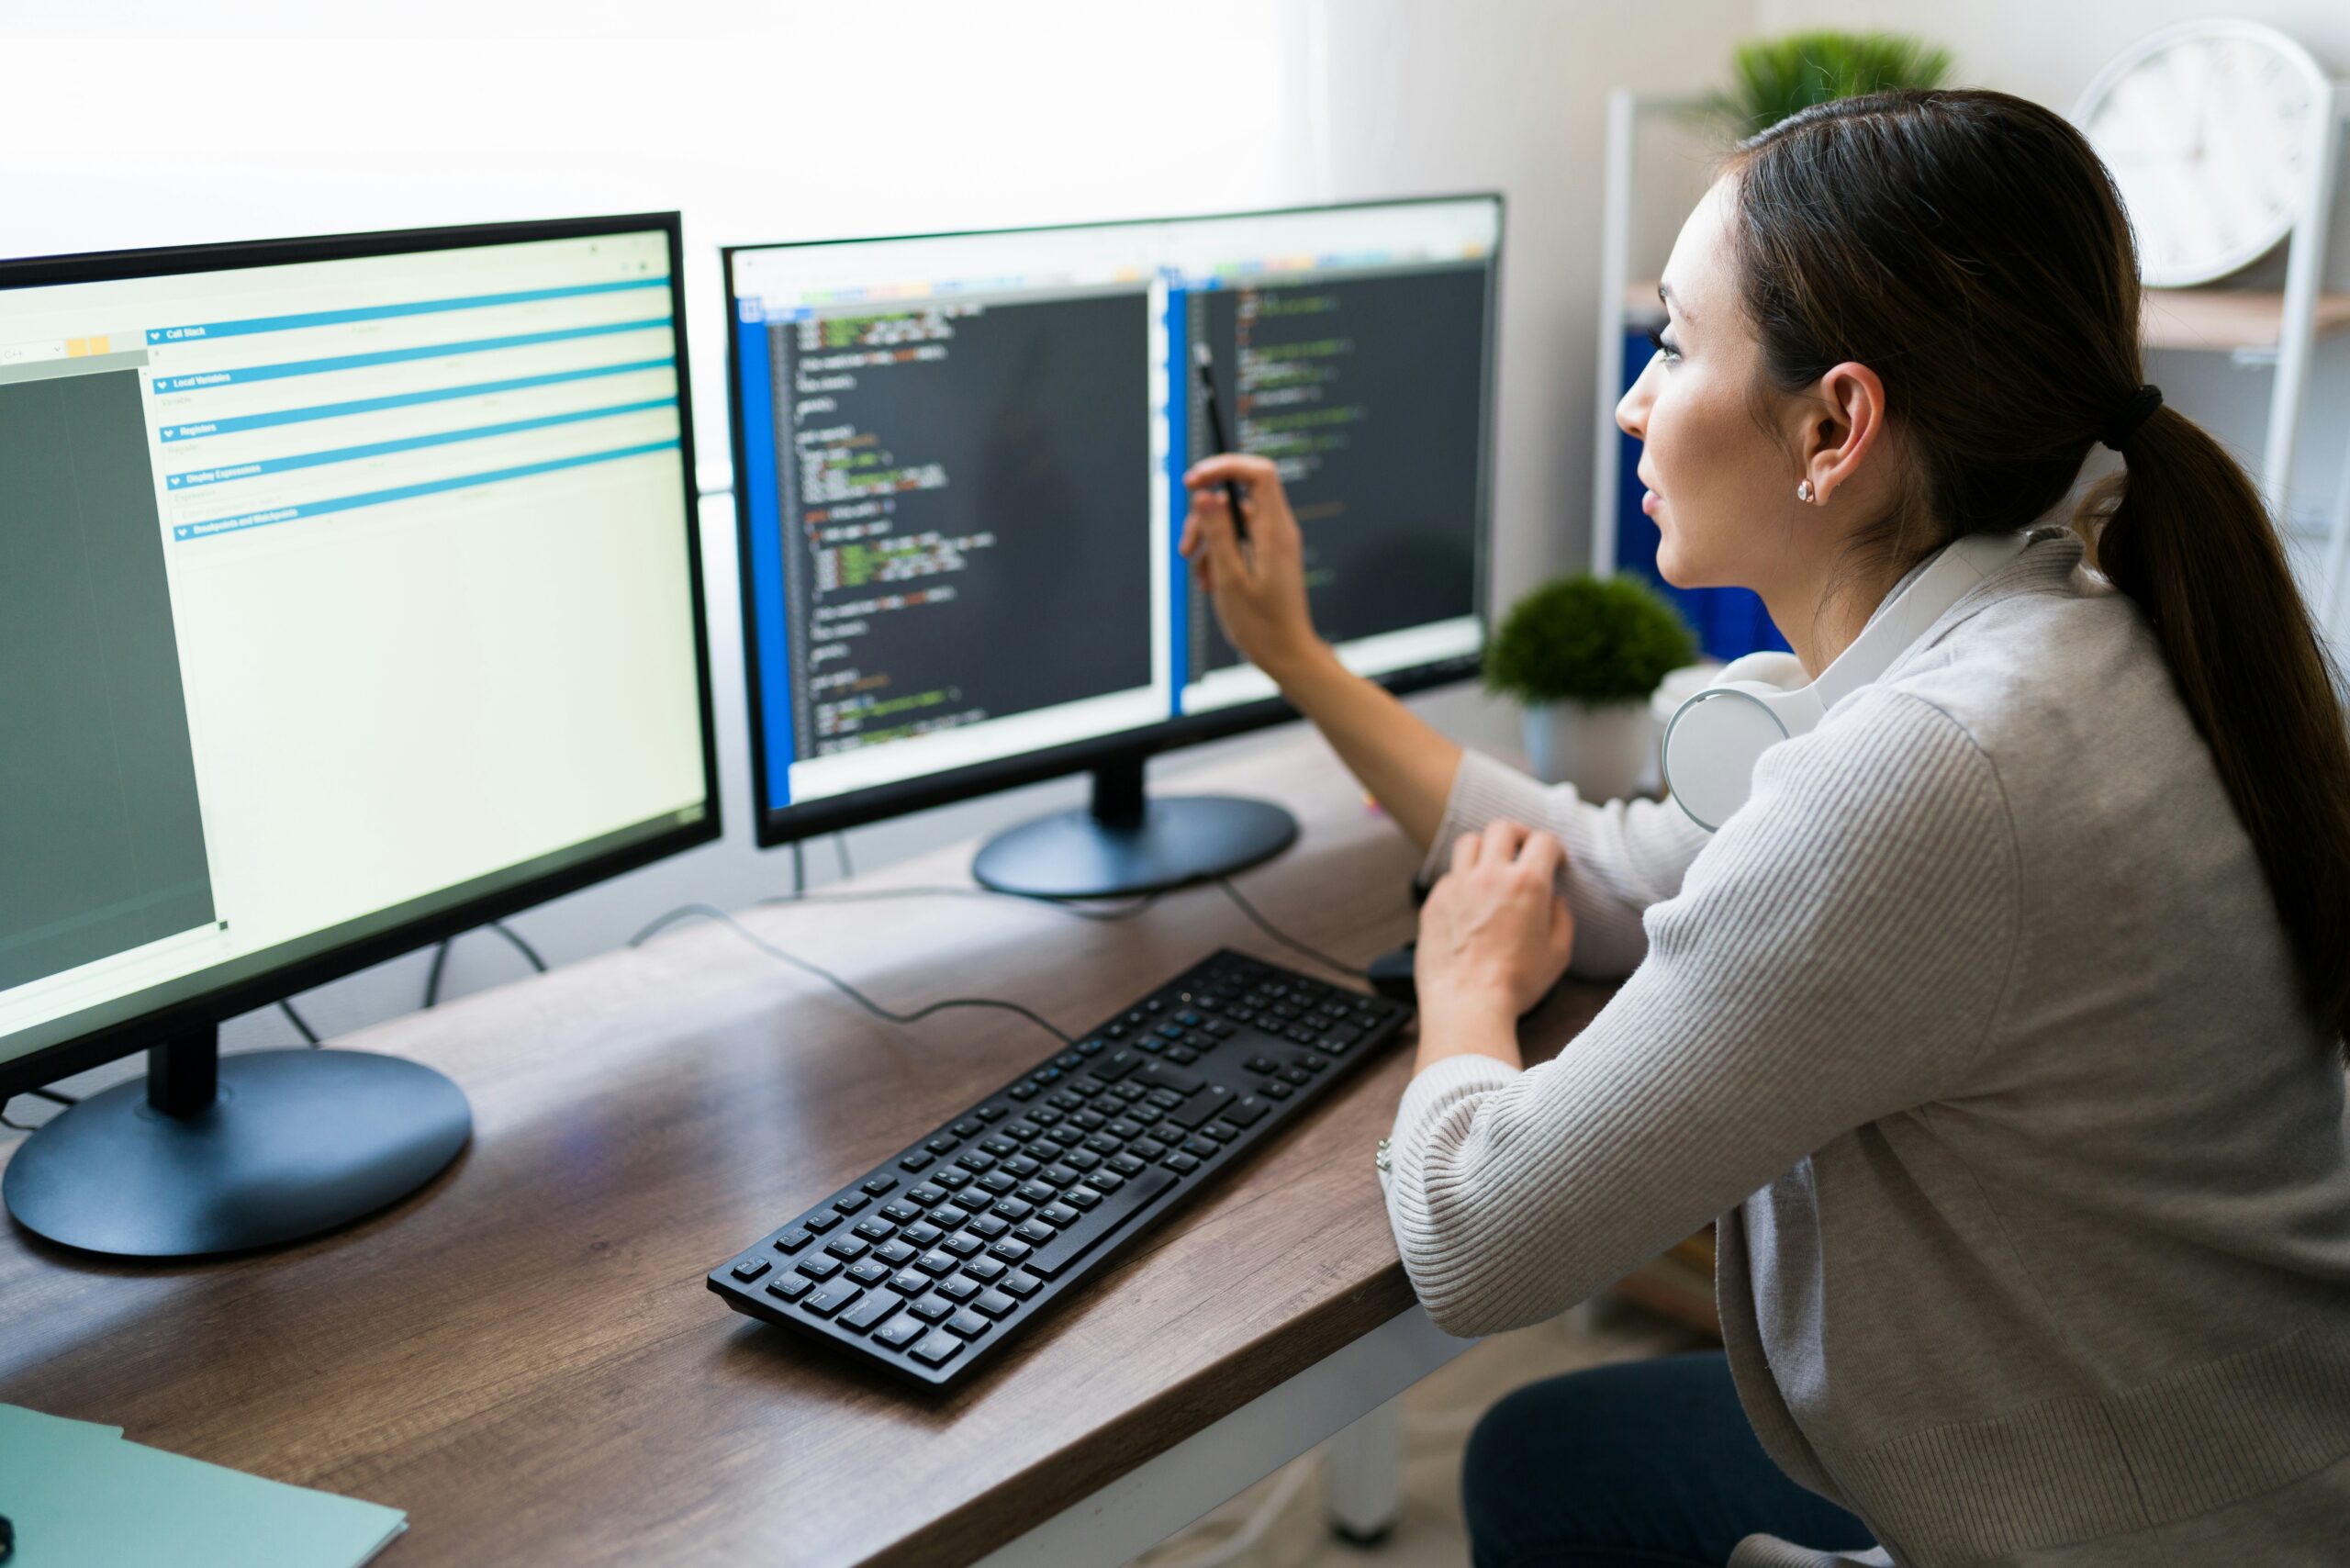 A woman analyzing code on multiple computer monitors in an office setting as part of managed IT services.